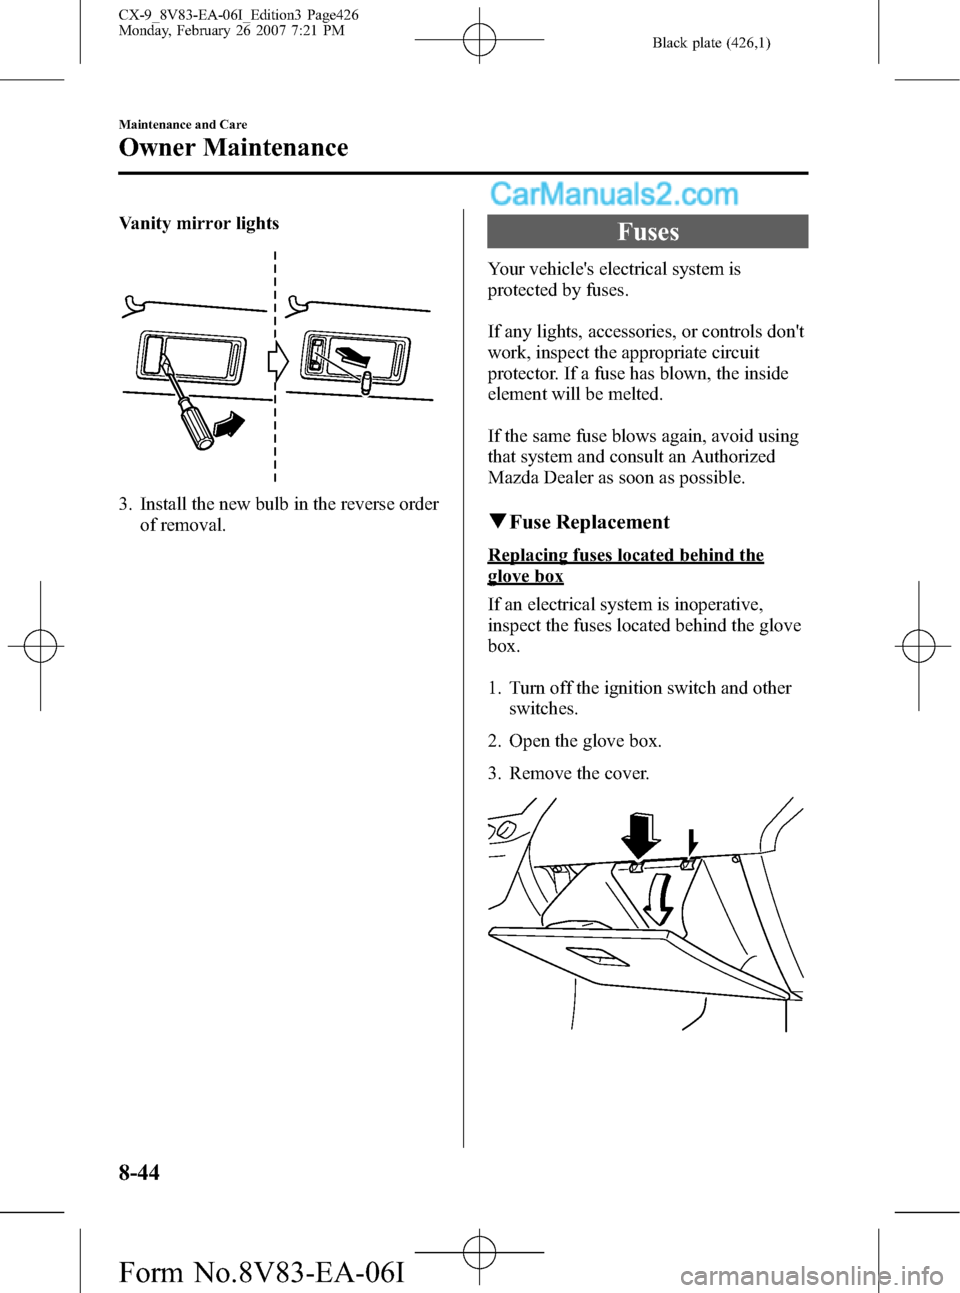 MAZDA MODEL CX-9 2007   (in English) User Guide Black plate (426,1)
Vanity mirror lights
3. Install the new bulb in the reverse order
of removal.
Fuses
Your vehicles electrical system is
protected by fuses.
If any lights, accessories, or controls 